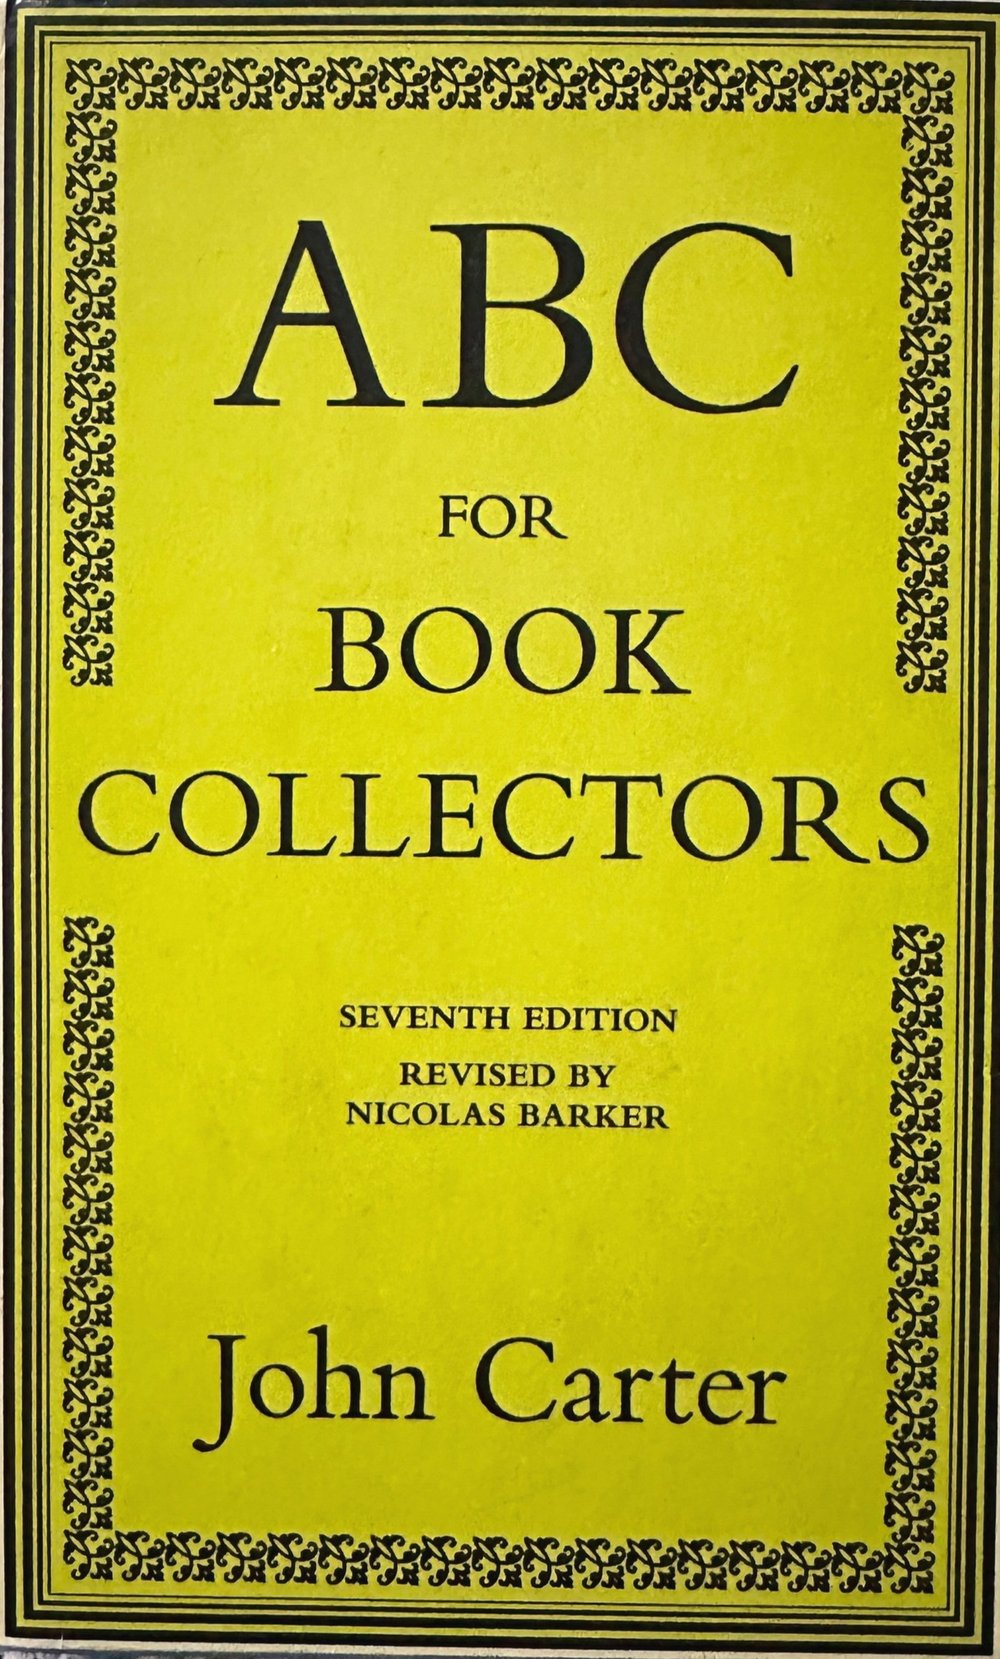 Copy of ABC for Book Collectors